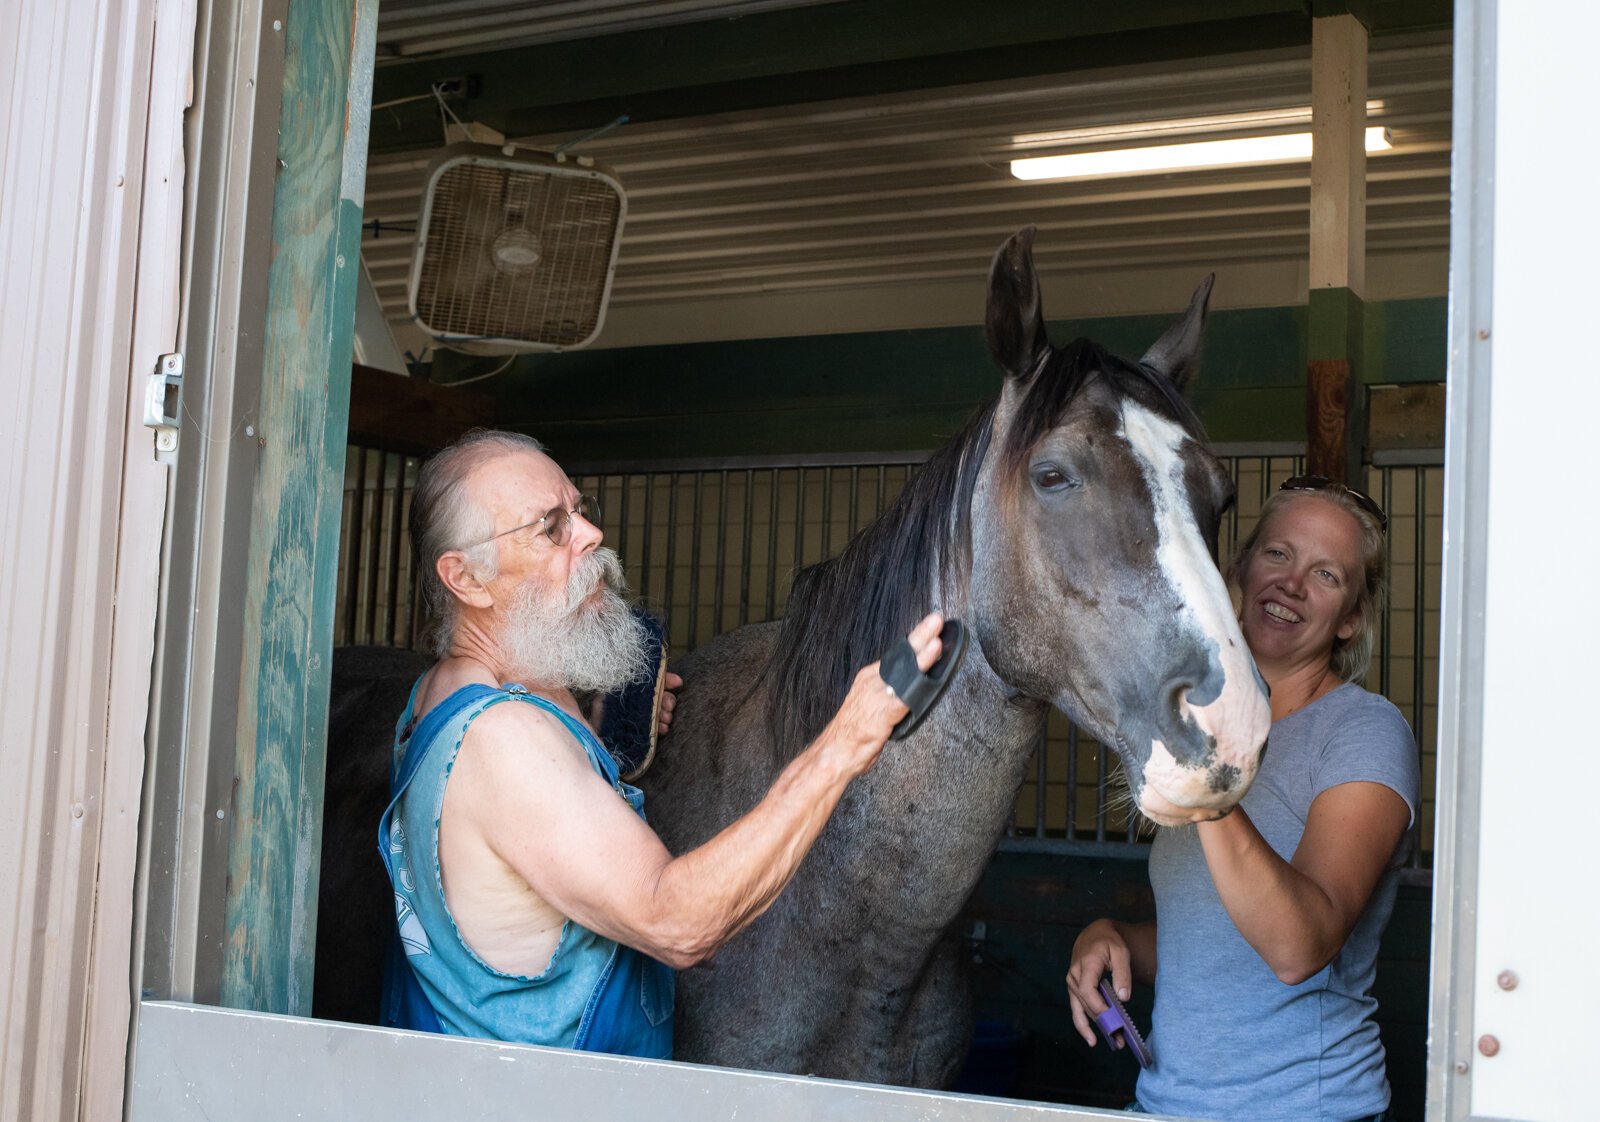 Allison Wheaton and veteran Randal Clemens work together to groom horse Mojo at Summit Equestrian Center, 10808 La Cabreah Ln.